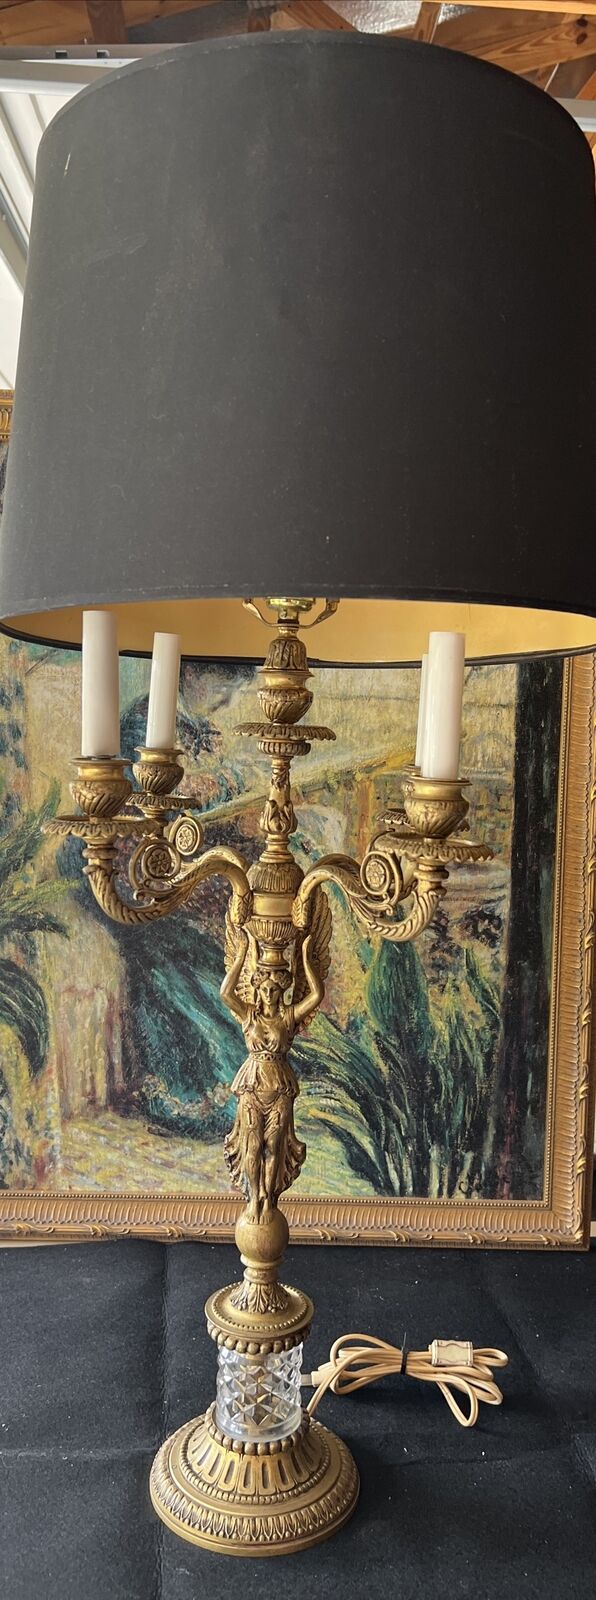 RARE FRENCH EMPIRE CANDELABRA LAMP Brass  Gorgeous 34” Figural Stunning No Shade